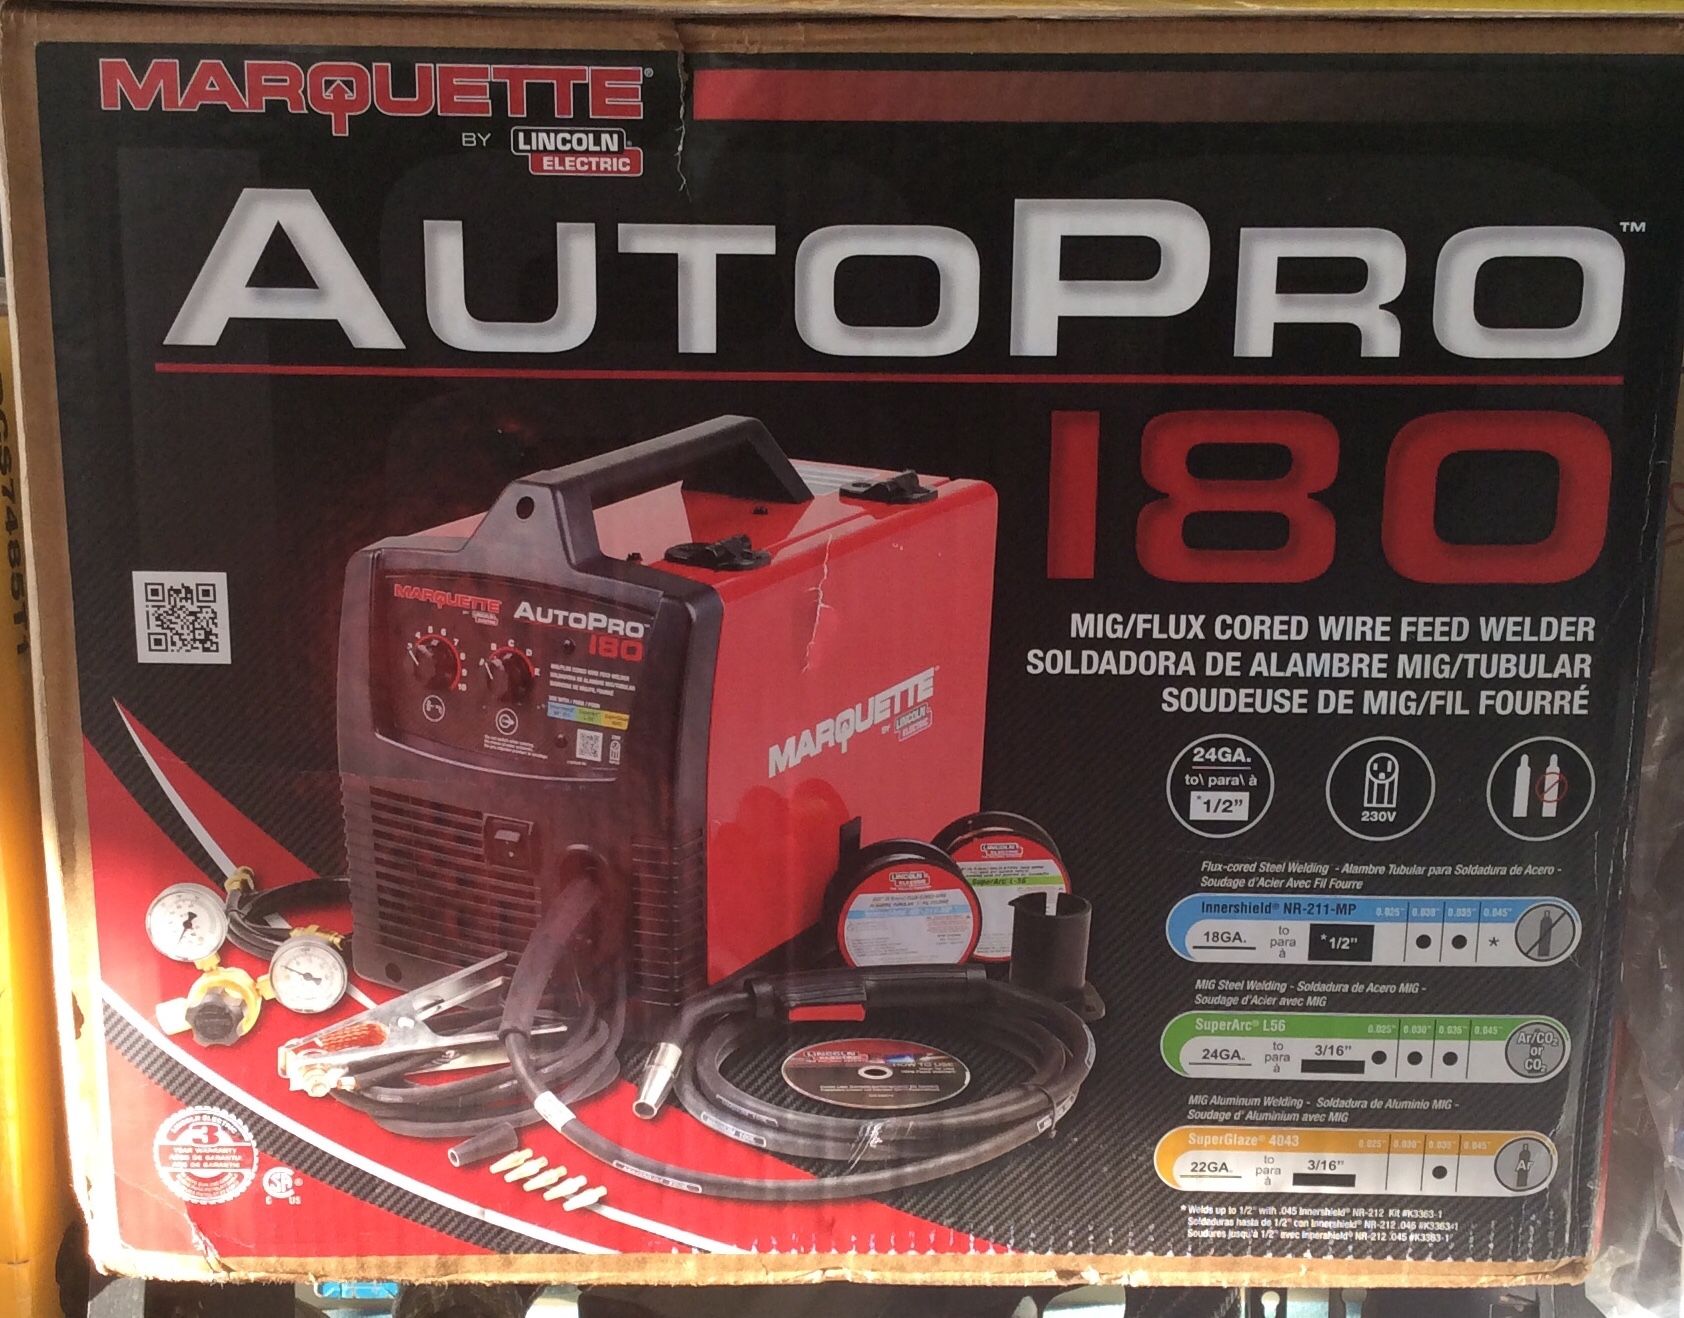 Marquette by Lincoln Electric AutoPro 180 MiG/Flux Cored Wire Feed Welder (18-3191)